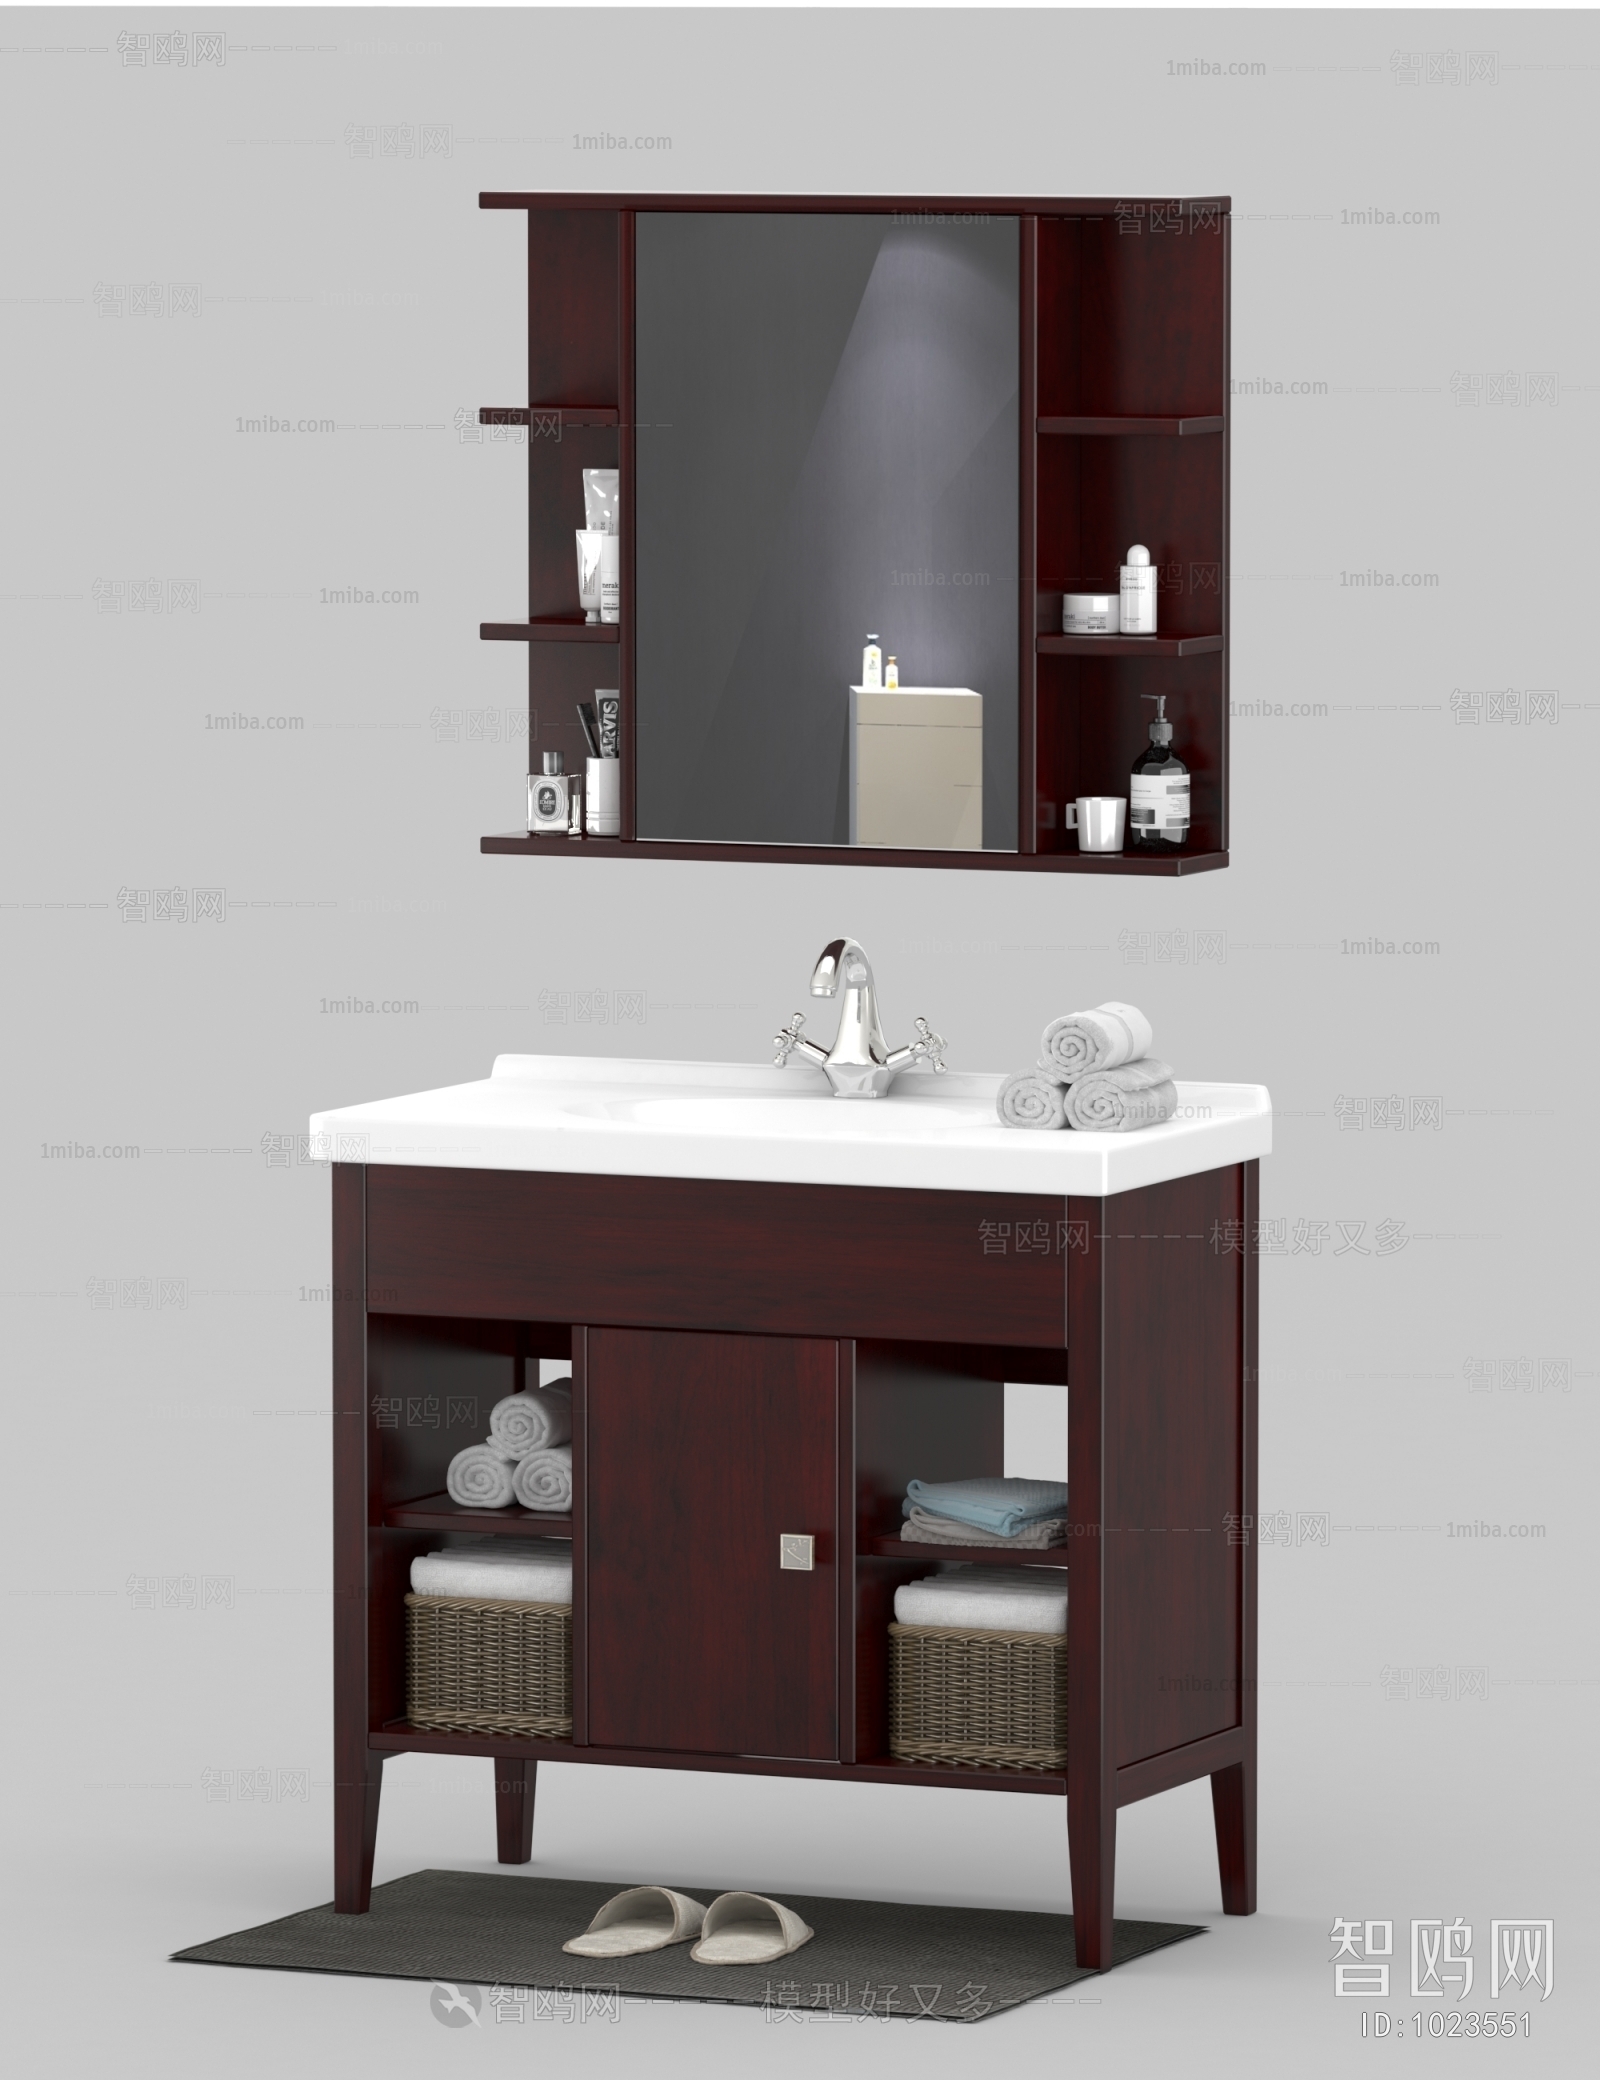 Classical Style Bathroom Cabinet